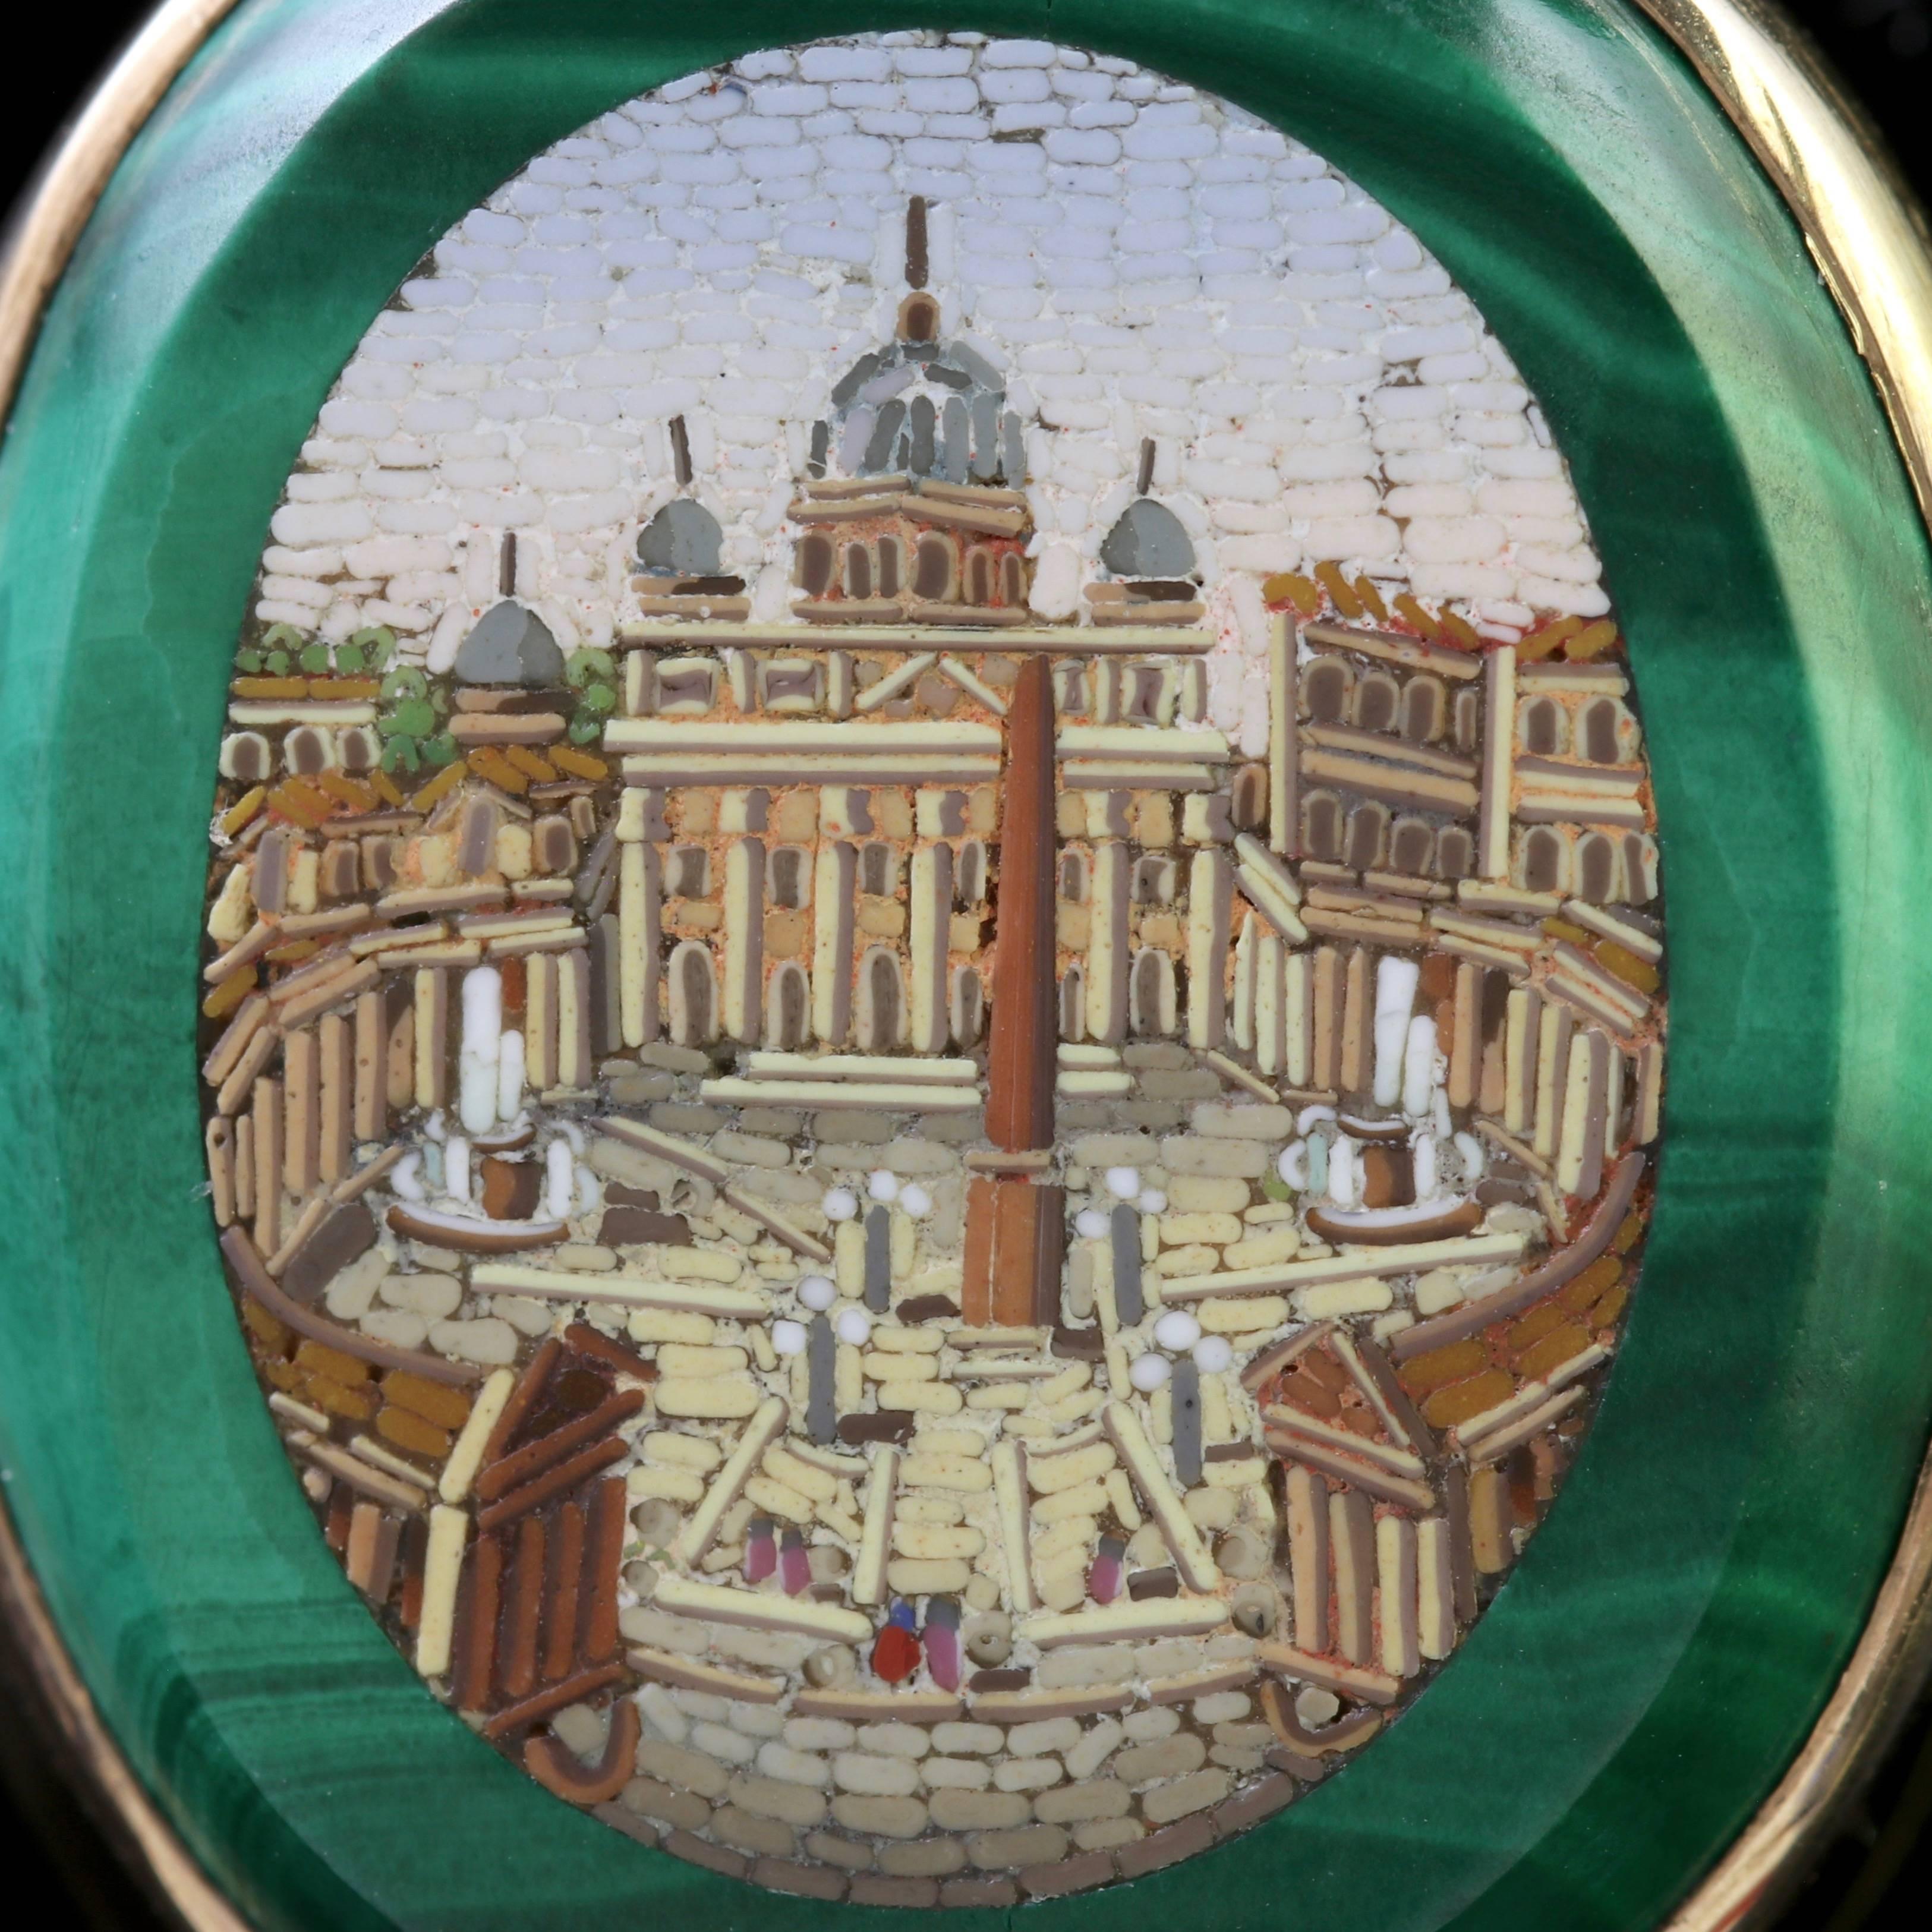 To read more please click continue reading below-

This genuine antique Victorian 18ct Gold brooch boasts a detailed Micro-Mosaic of St. Peter’s square in the centre.

St. Peter’s square is home to St. Peter’s Basilica, a renowned Roman Renaissance